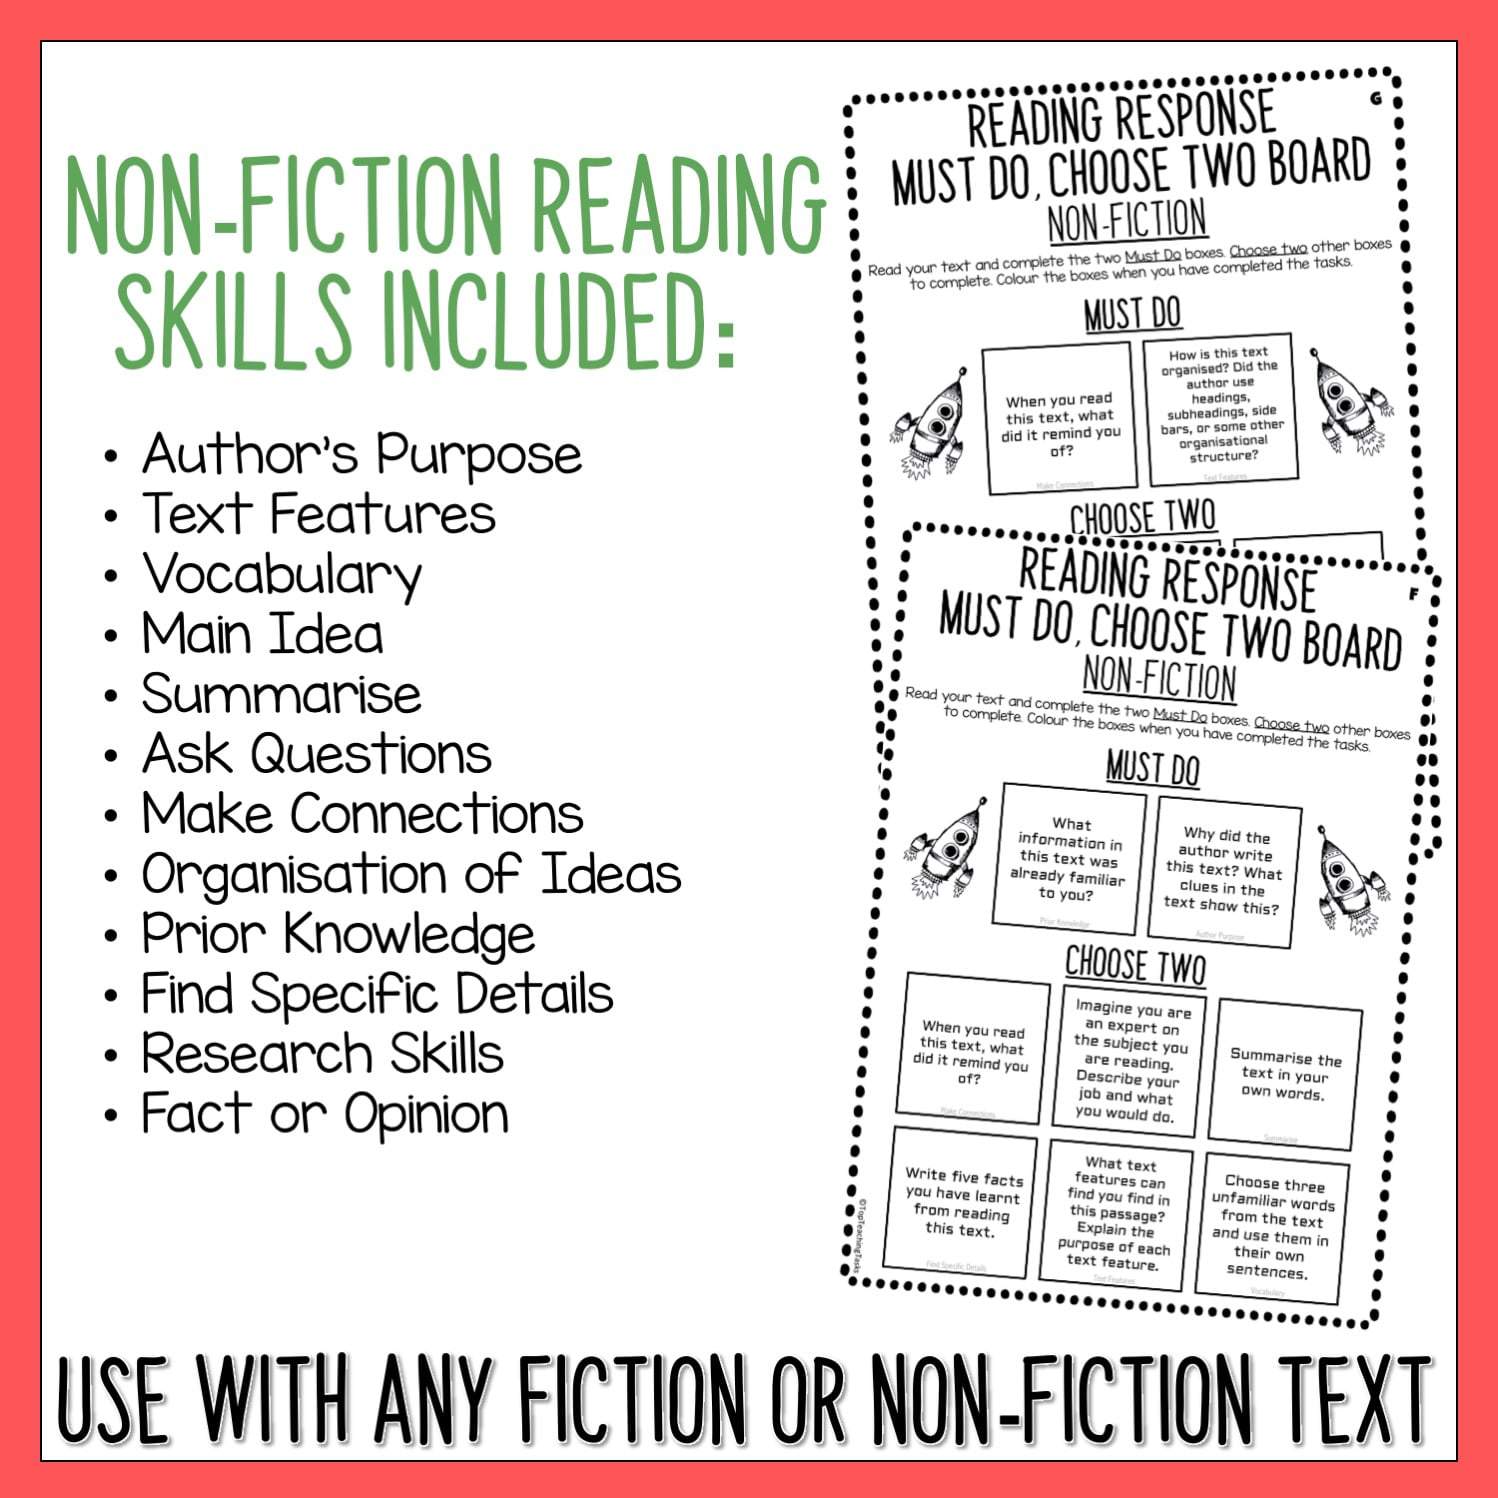 Reading Response Worksheets for Fiction and Non-Fiction Texts | Top